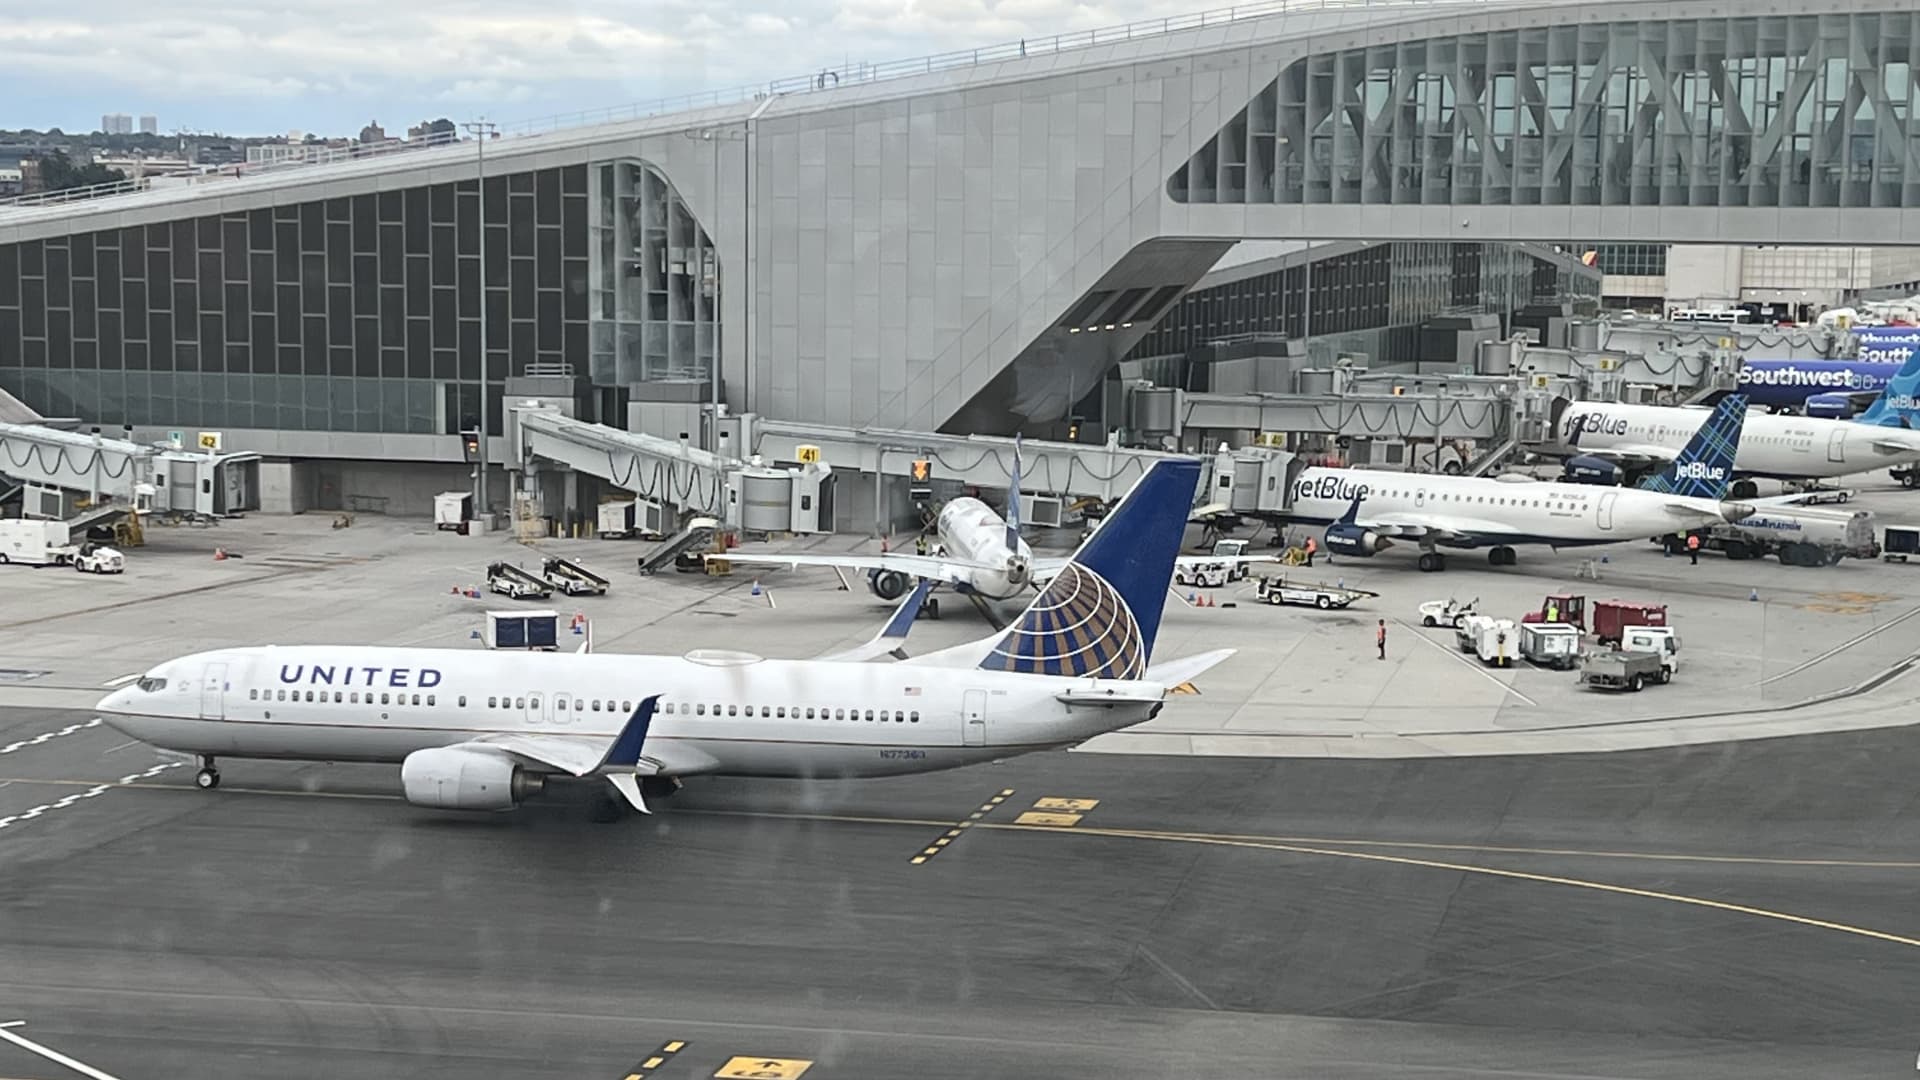 United Airlines is aiming to have electric aircraft flying regional routes by the end of the decade, part of the company's goal to fully reduce i